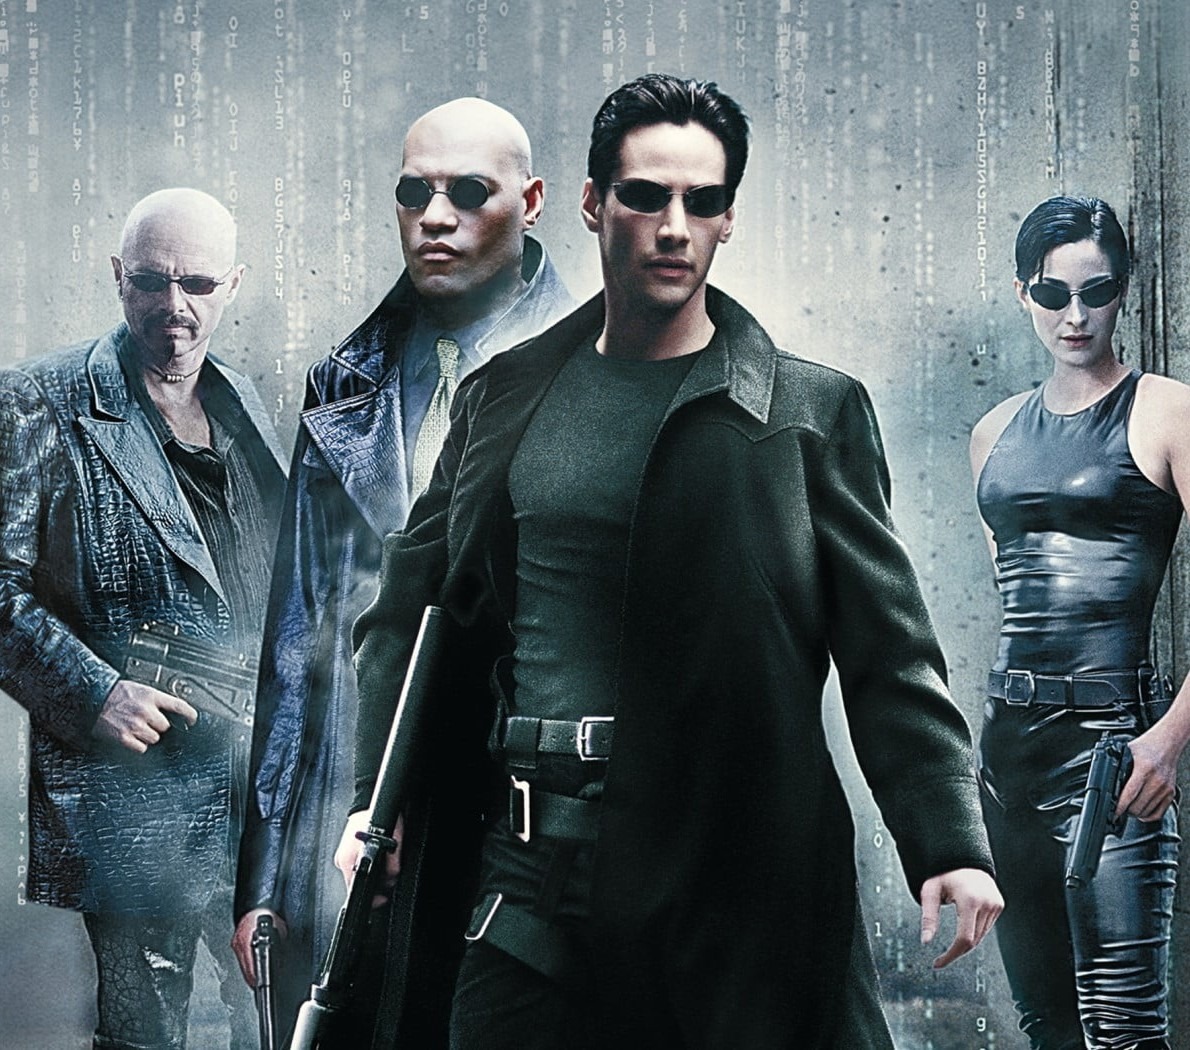 Double Keanu Reeves in 2020: The Matrix 4 Comes Out The Same Time As